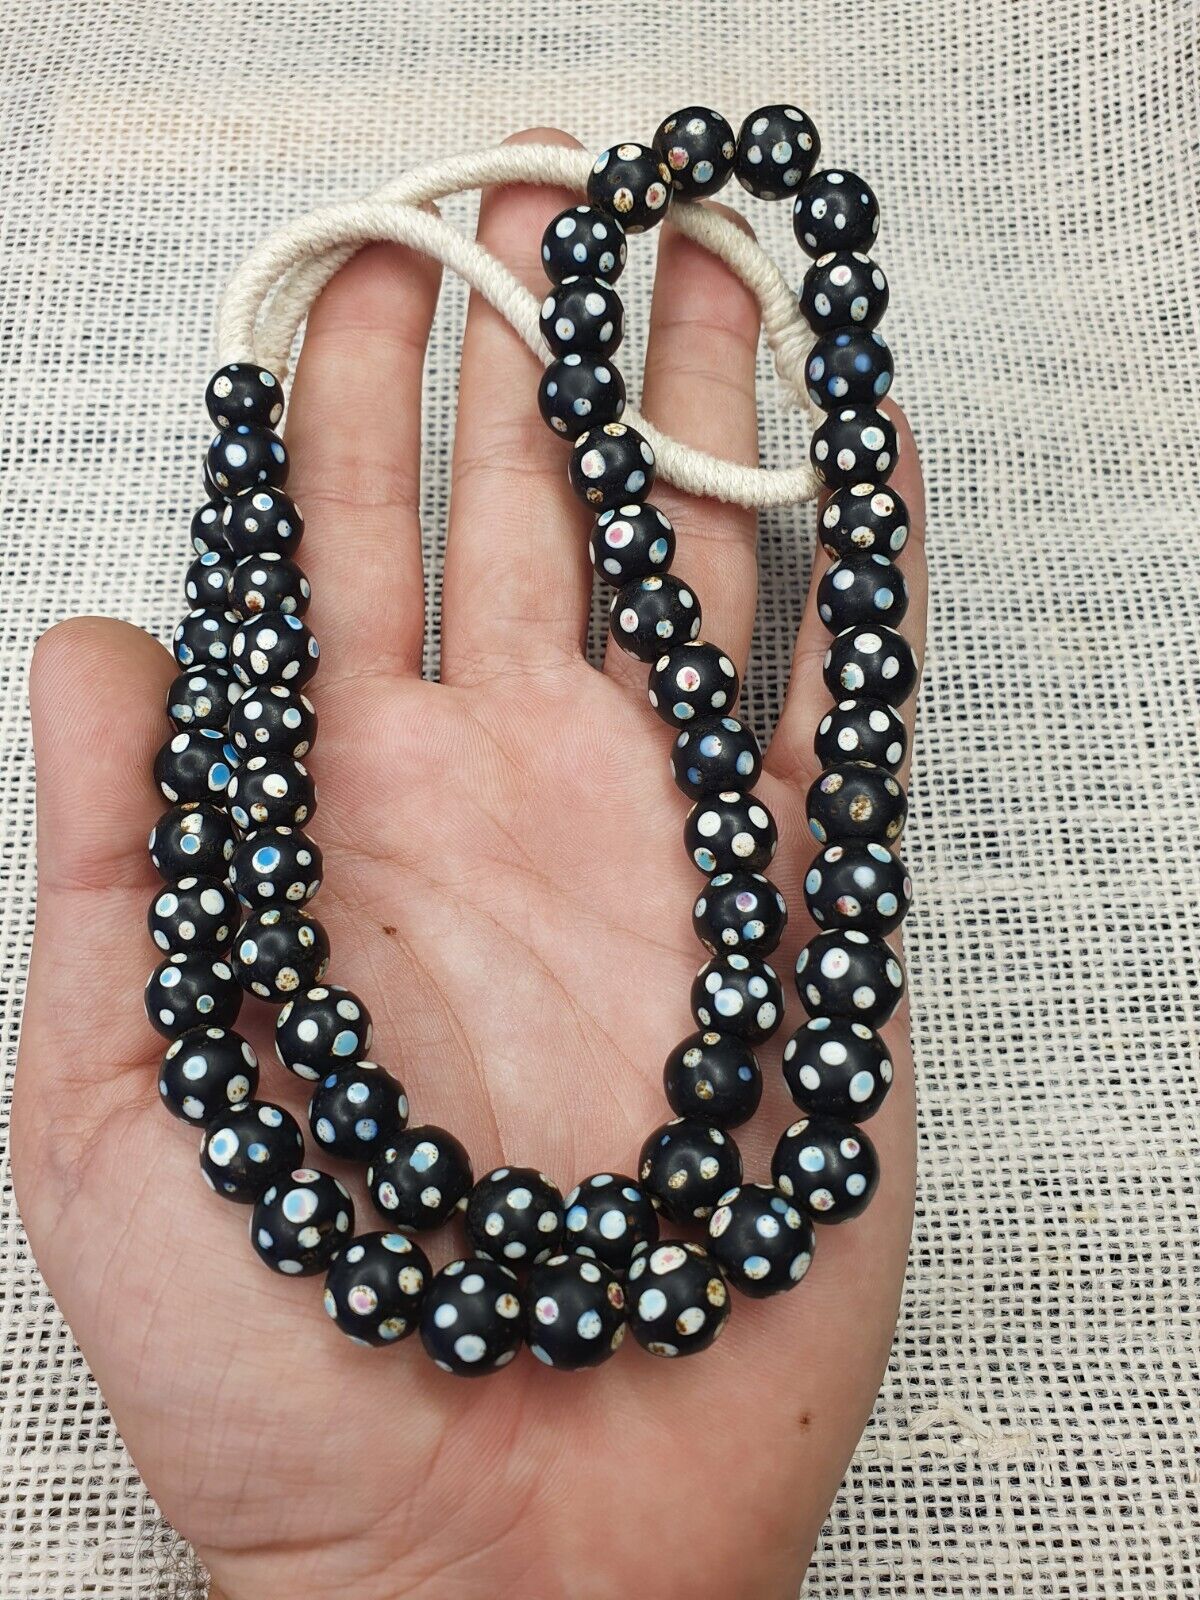 Black Dot Venetian Skunk beads African Trade Beads Authentic Antiques COLLECTION